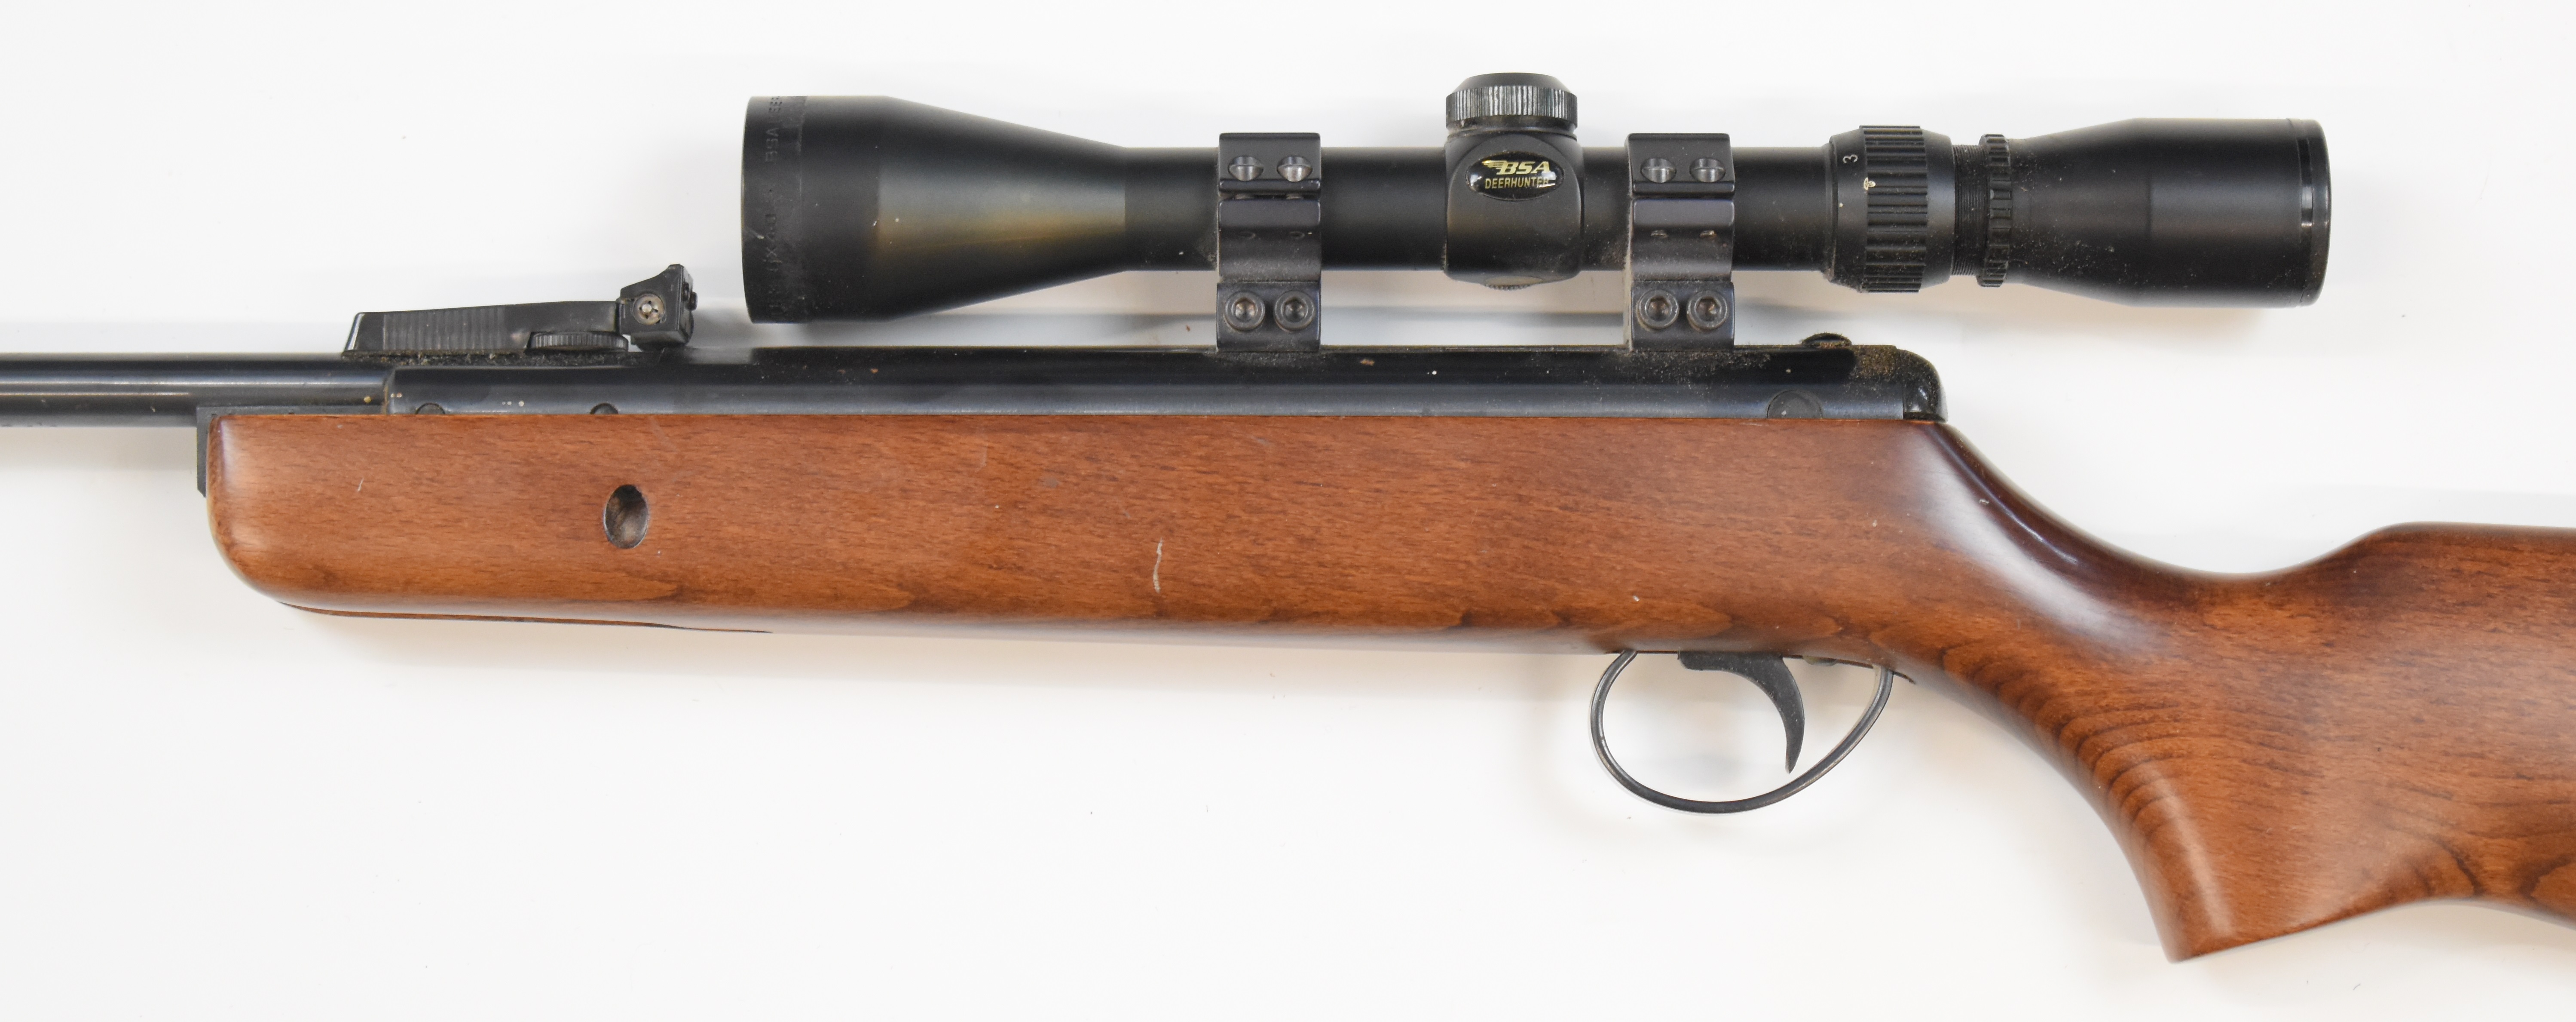 BSA Supersport .22 air rifle with semi-pistol grip, raised cheek piece, adjustable trigger and BSA - Image 8 of 9